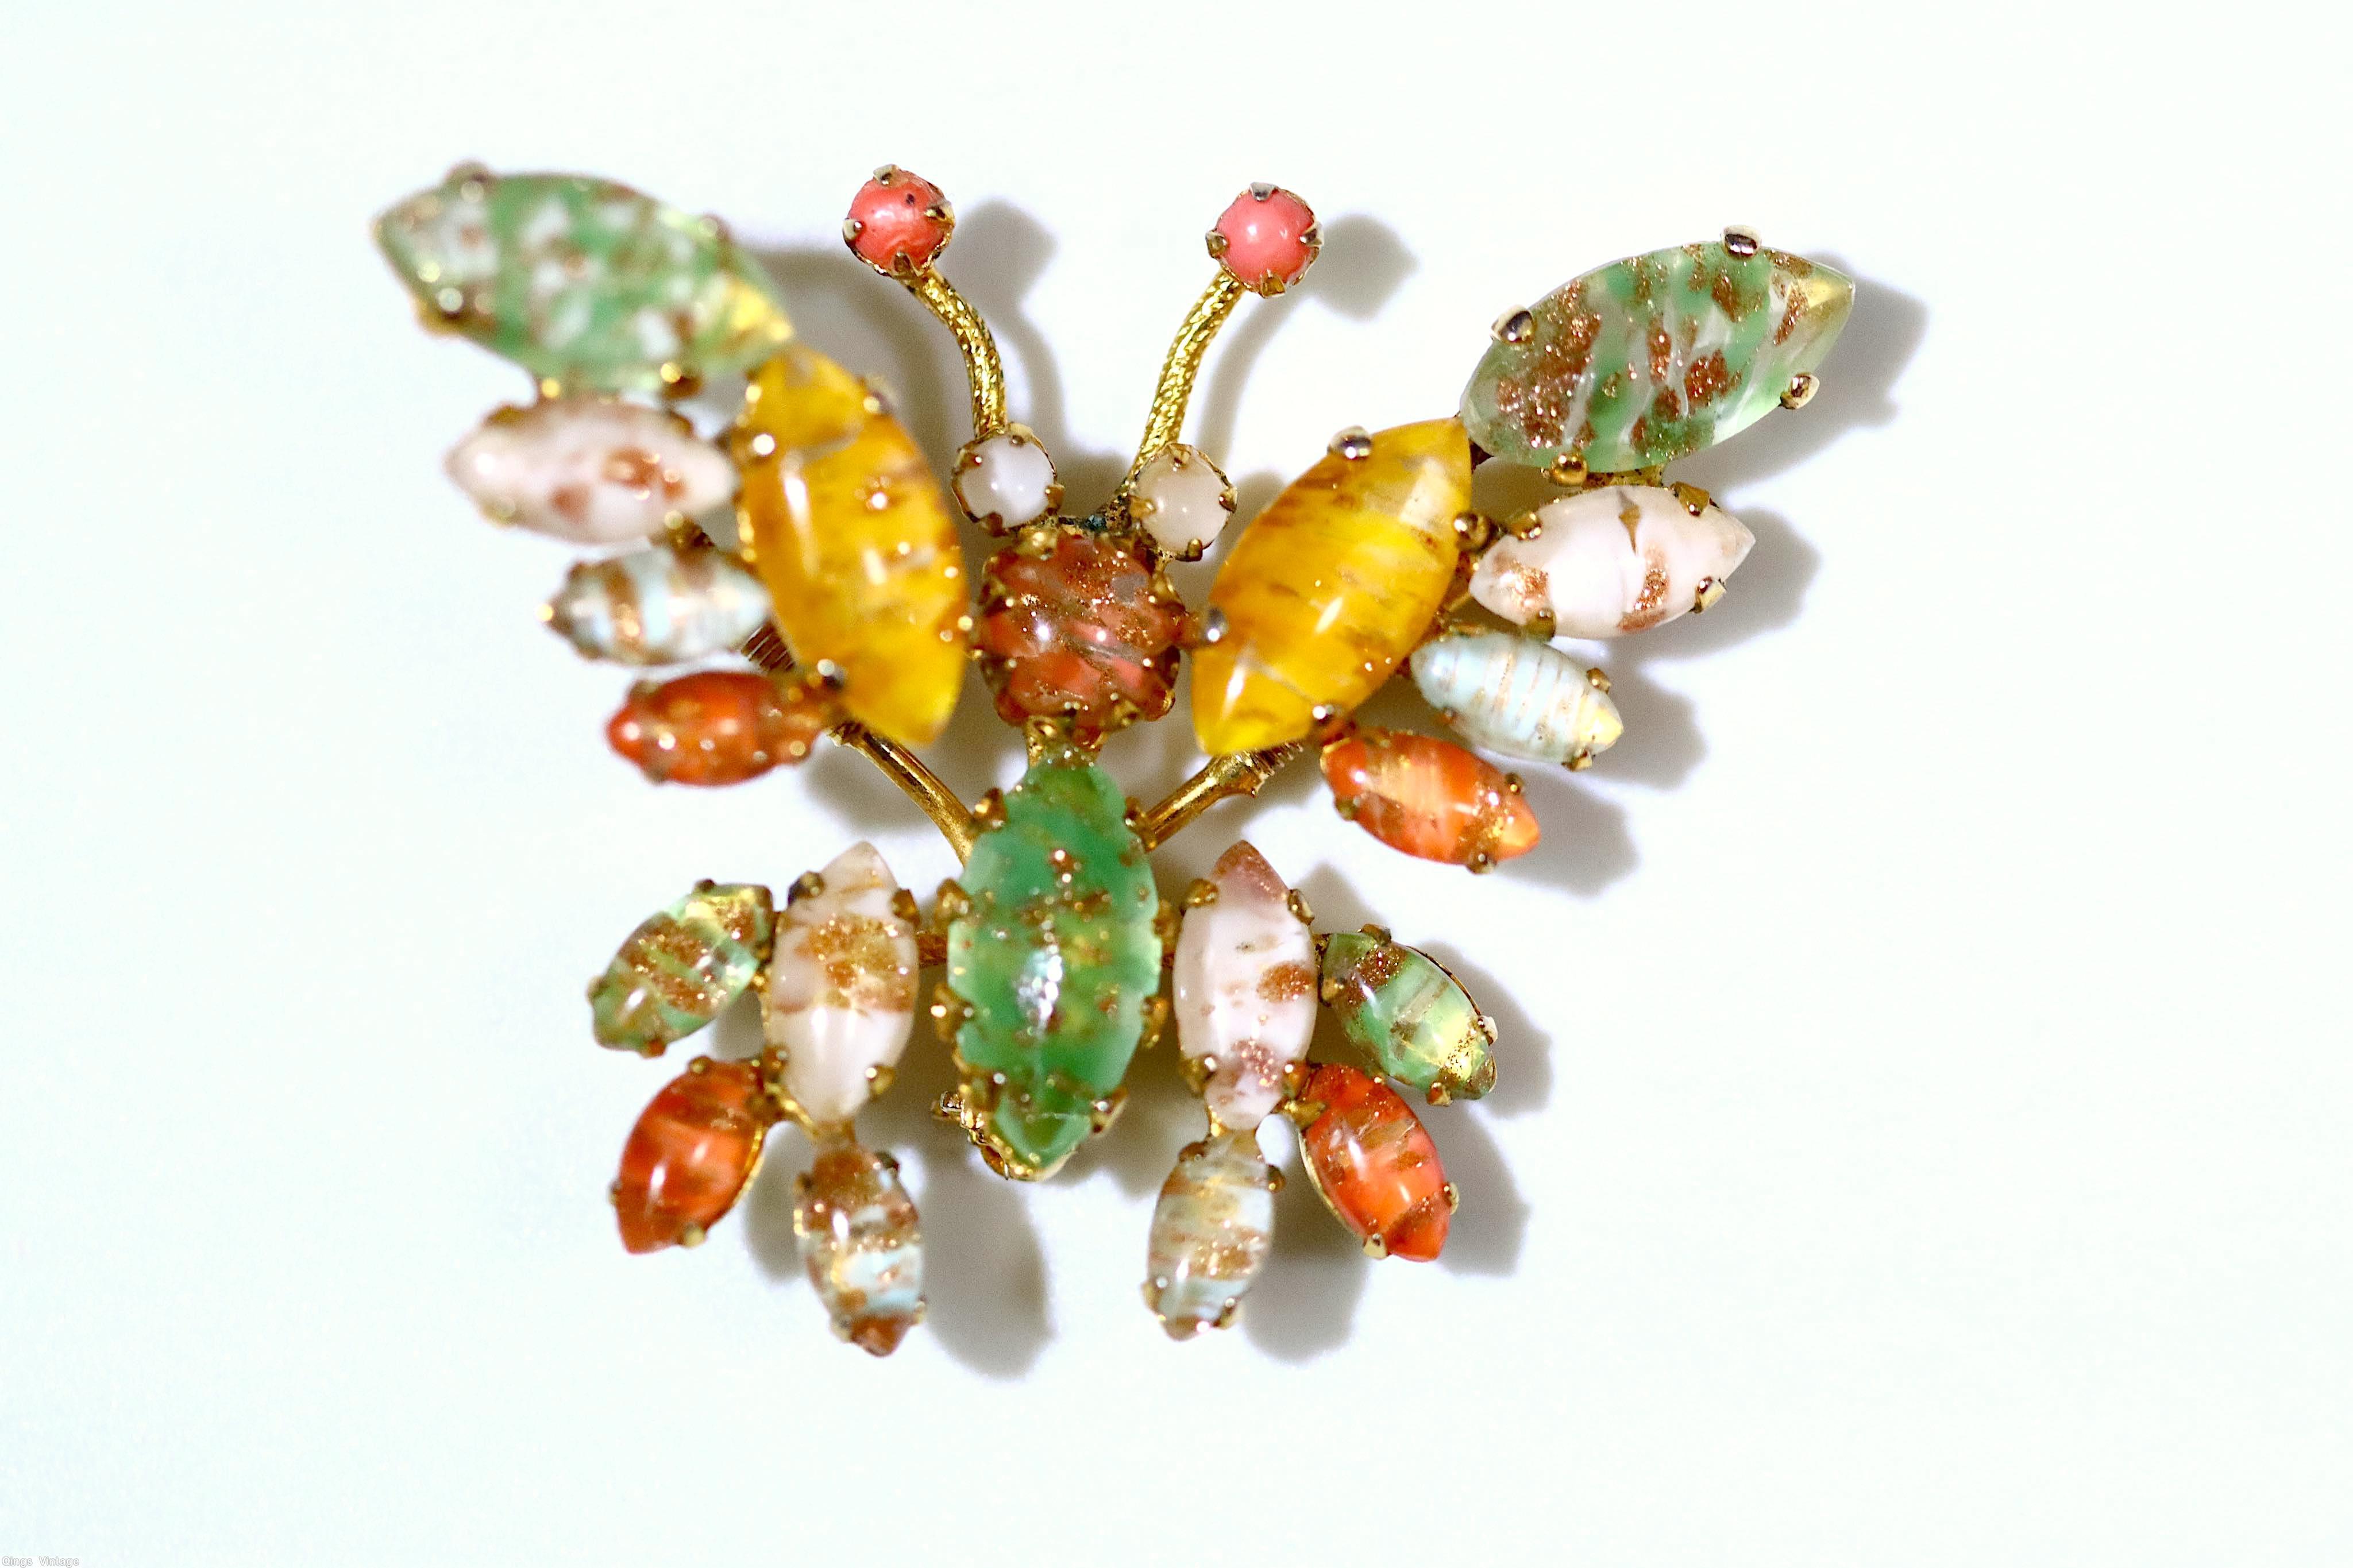 Schreiner trembling wing small butterfly all venetian coral amber green white coral small chaton goldtone jewelry